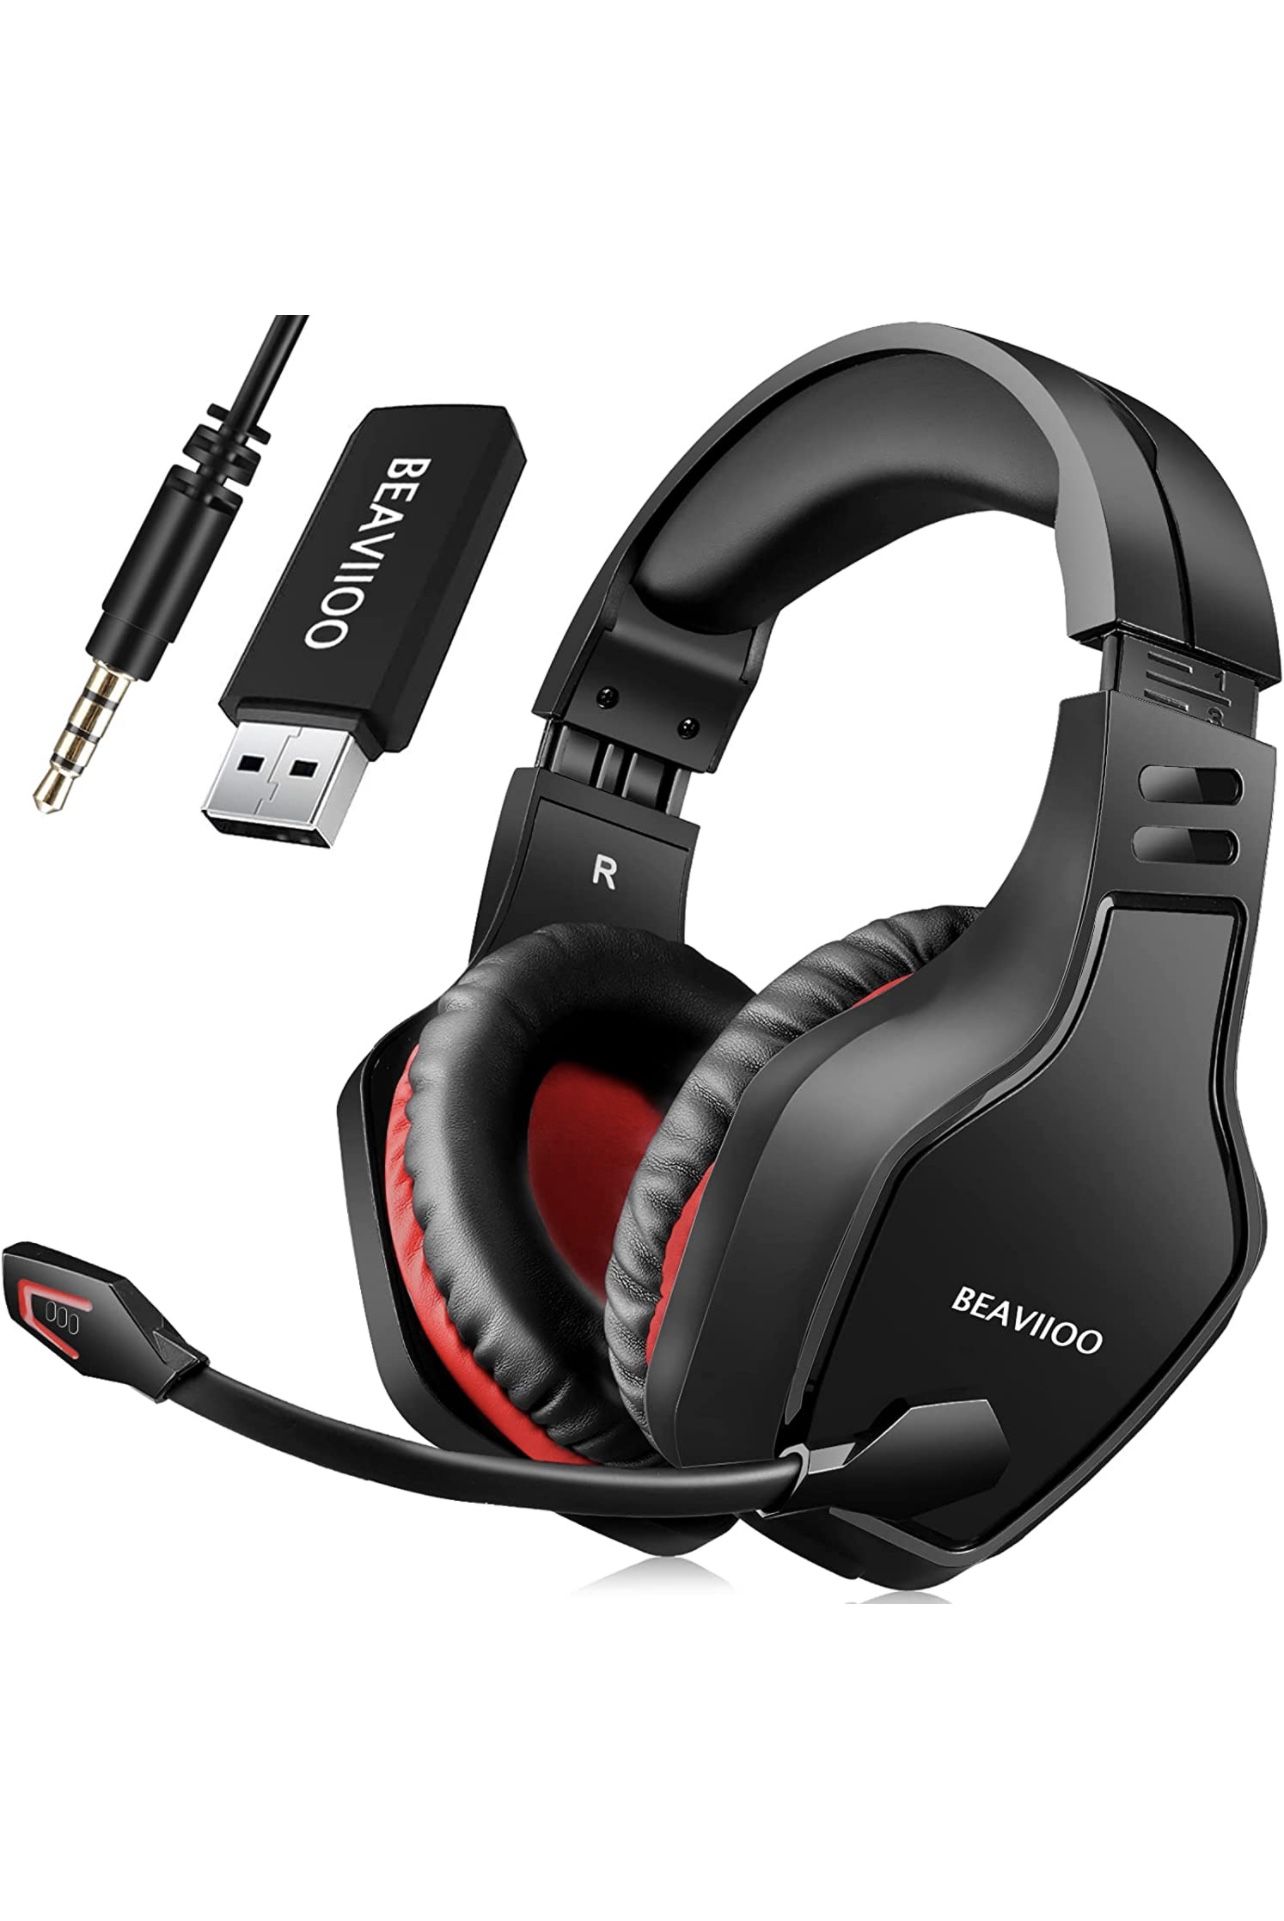 BEAVIIOO 2.4G Wireless Gaming Headset with Mic for PC PS4 PS5 Playstation 4 5, Bluetooth Gaming Headphones with Microphone for Laptop